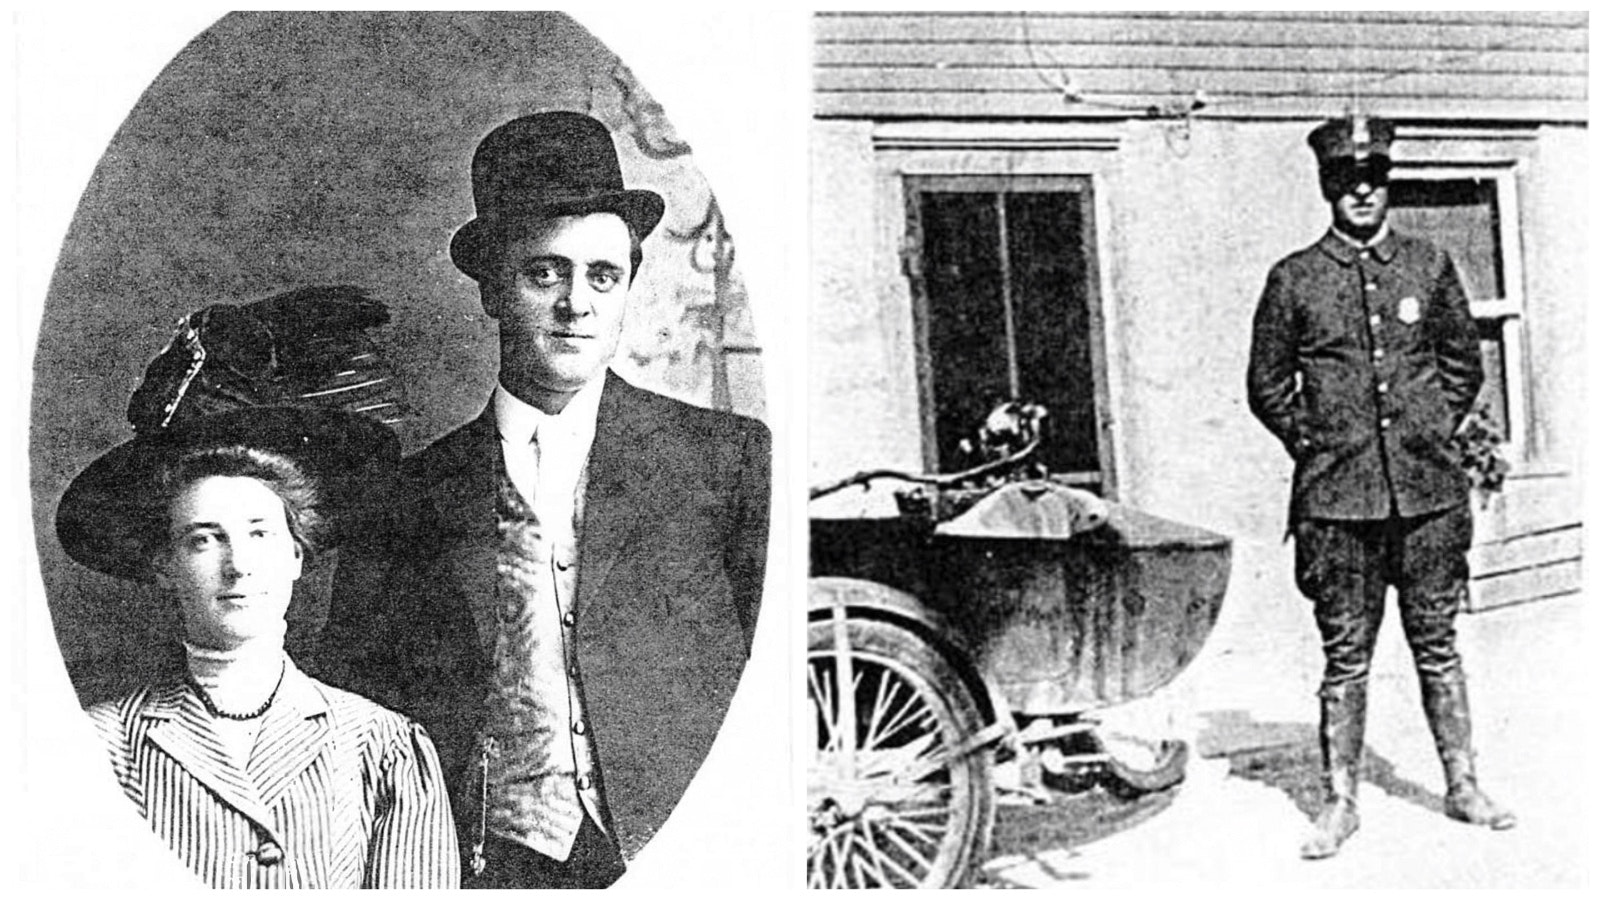 Left, George Radden and his wife, Caroline, in 1908. Right, A photo of George Radden in 1925 next to his motorcycle.